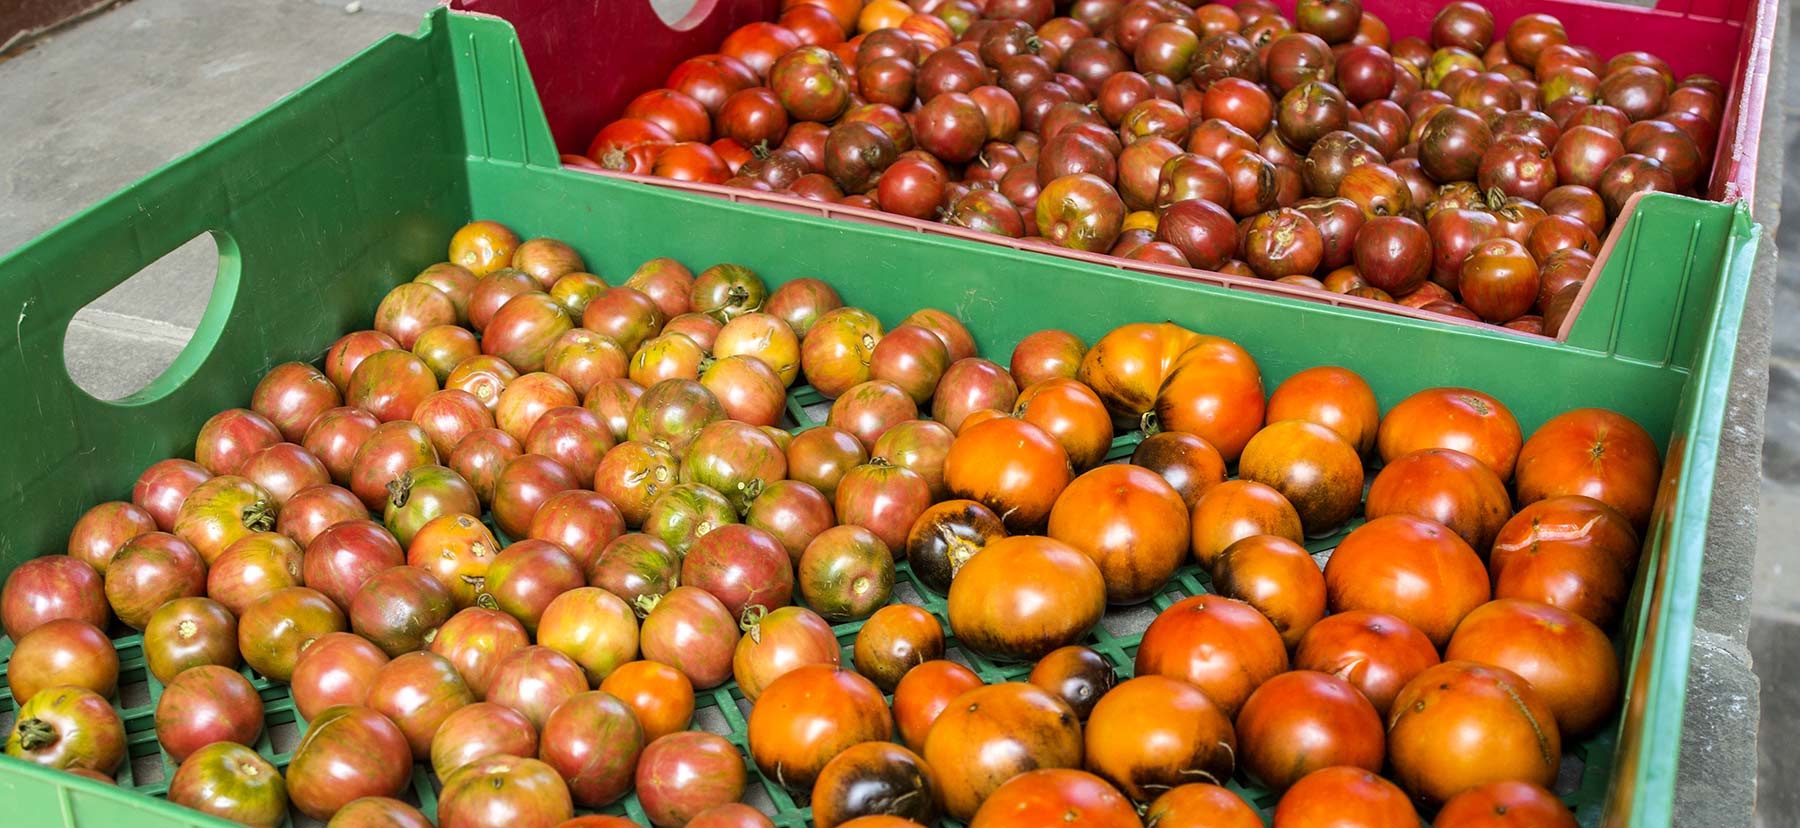 Hundreds of freshly harvested tomatoes grown on campus